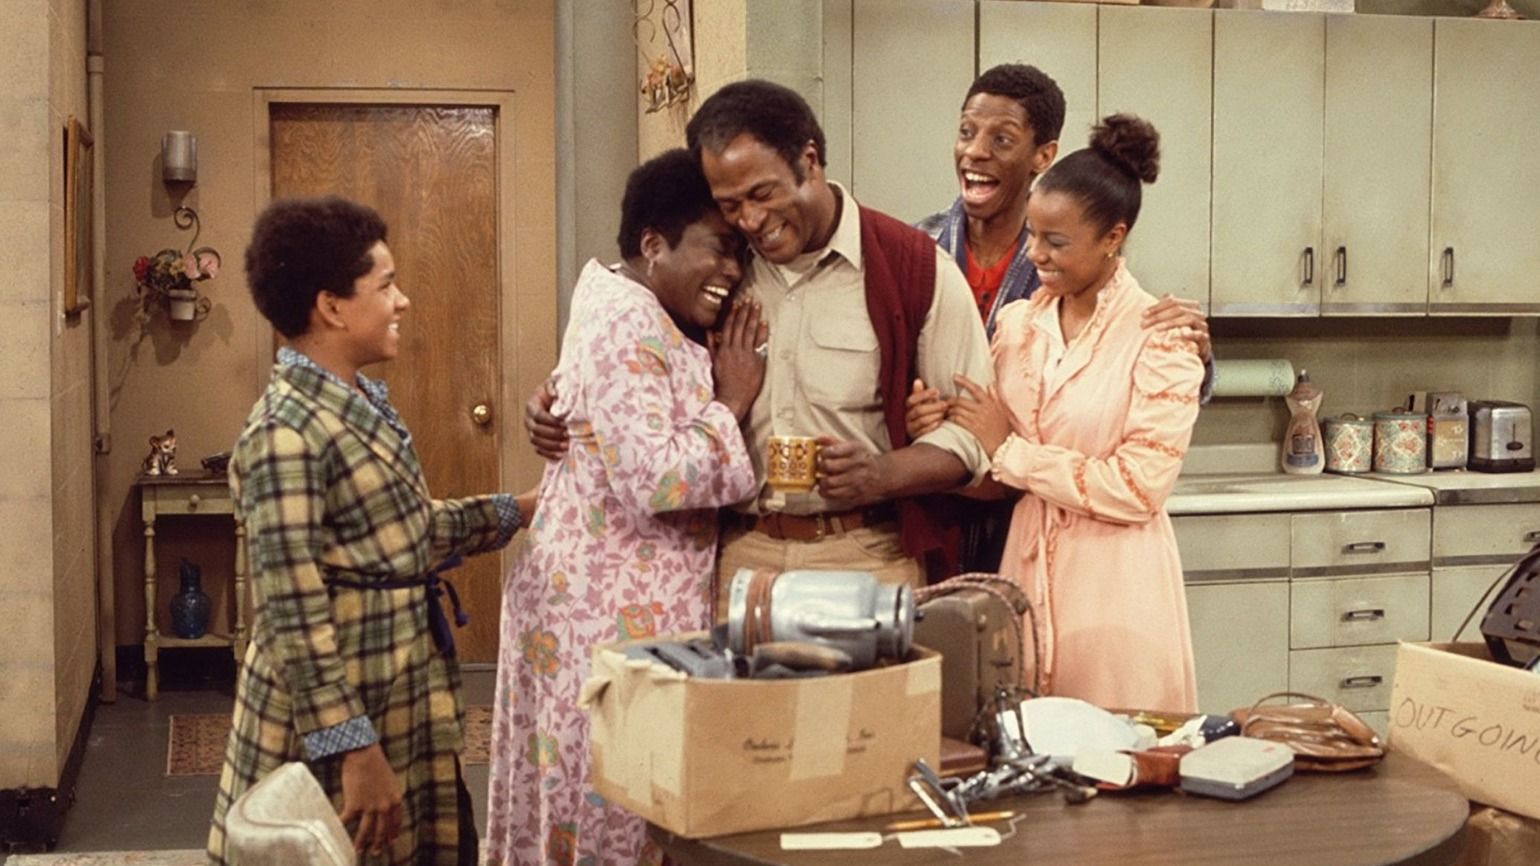 Florida Evans (Esther Rolle) in Good Times